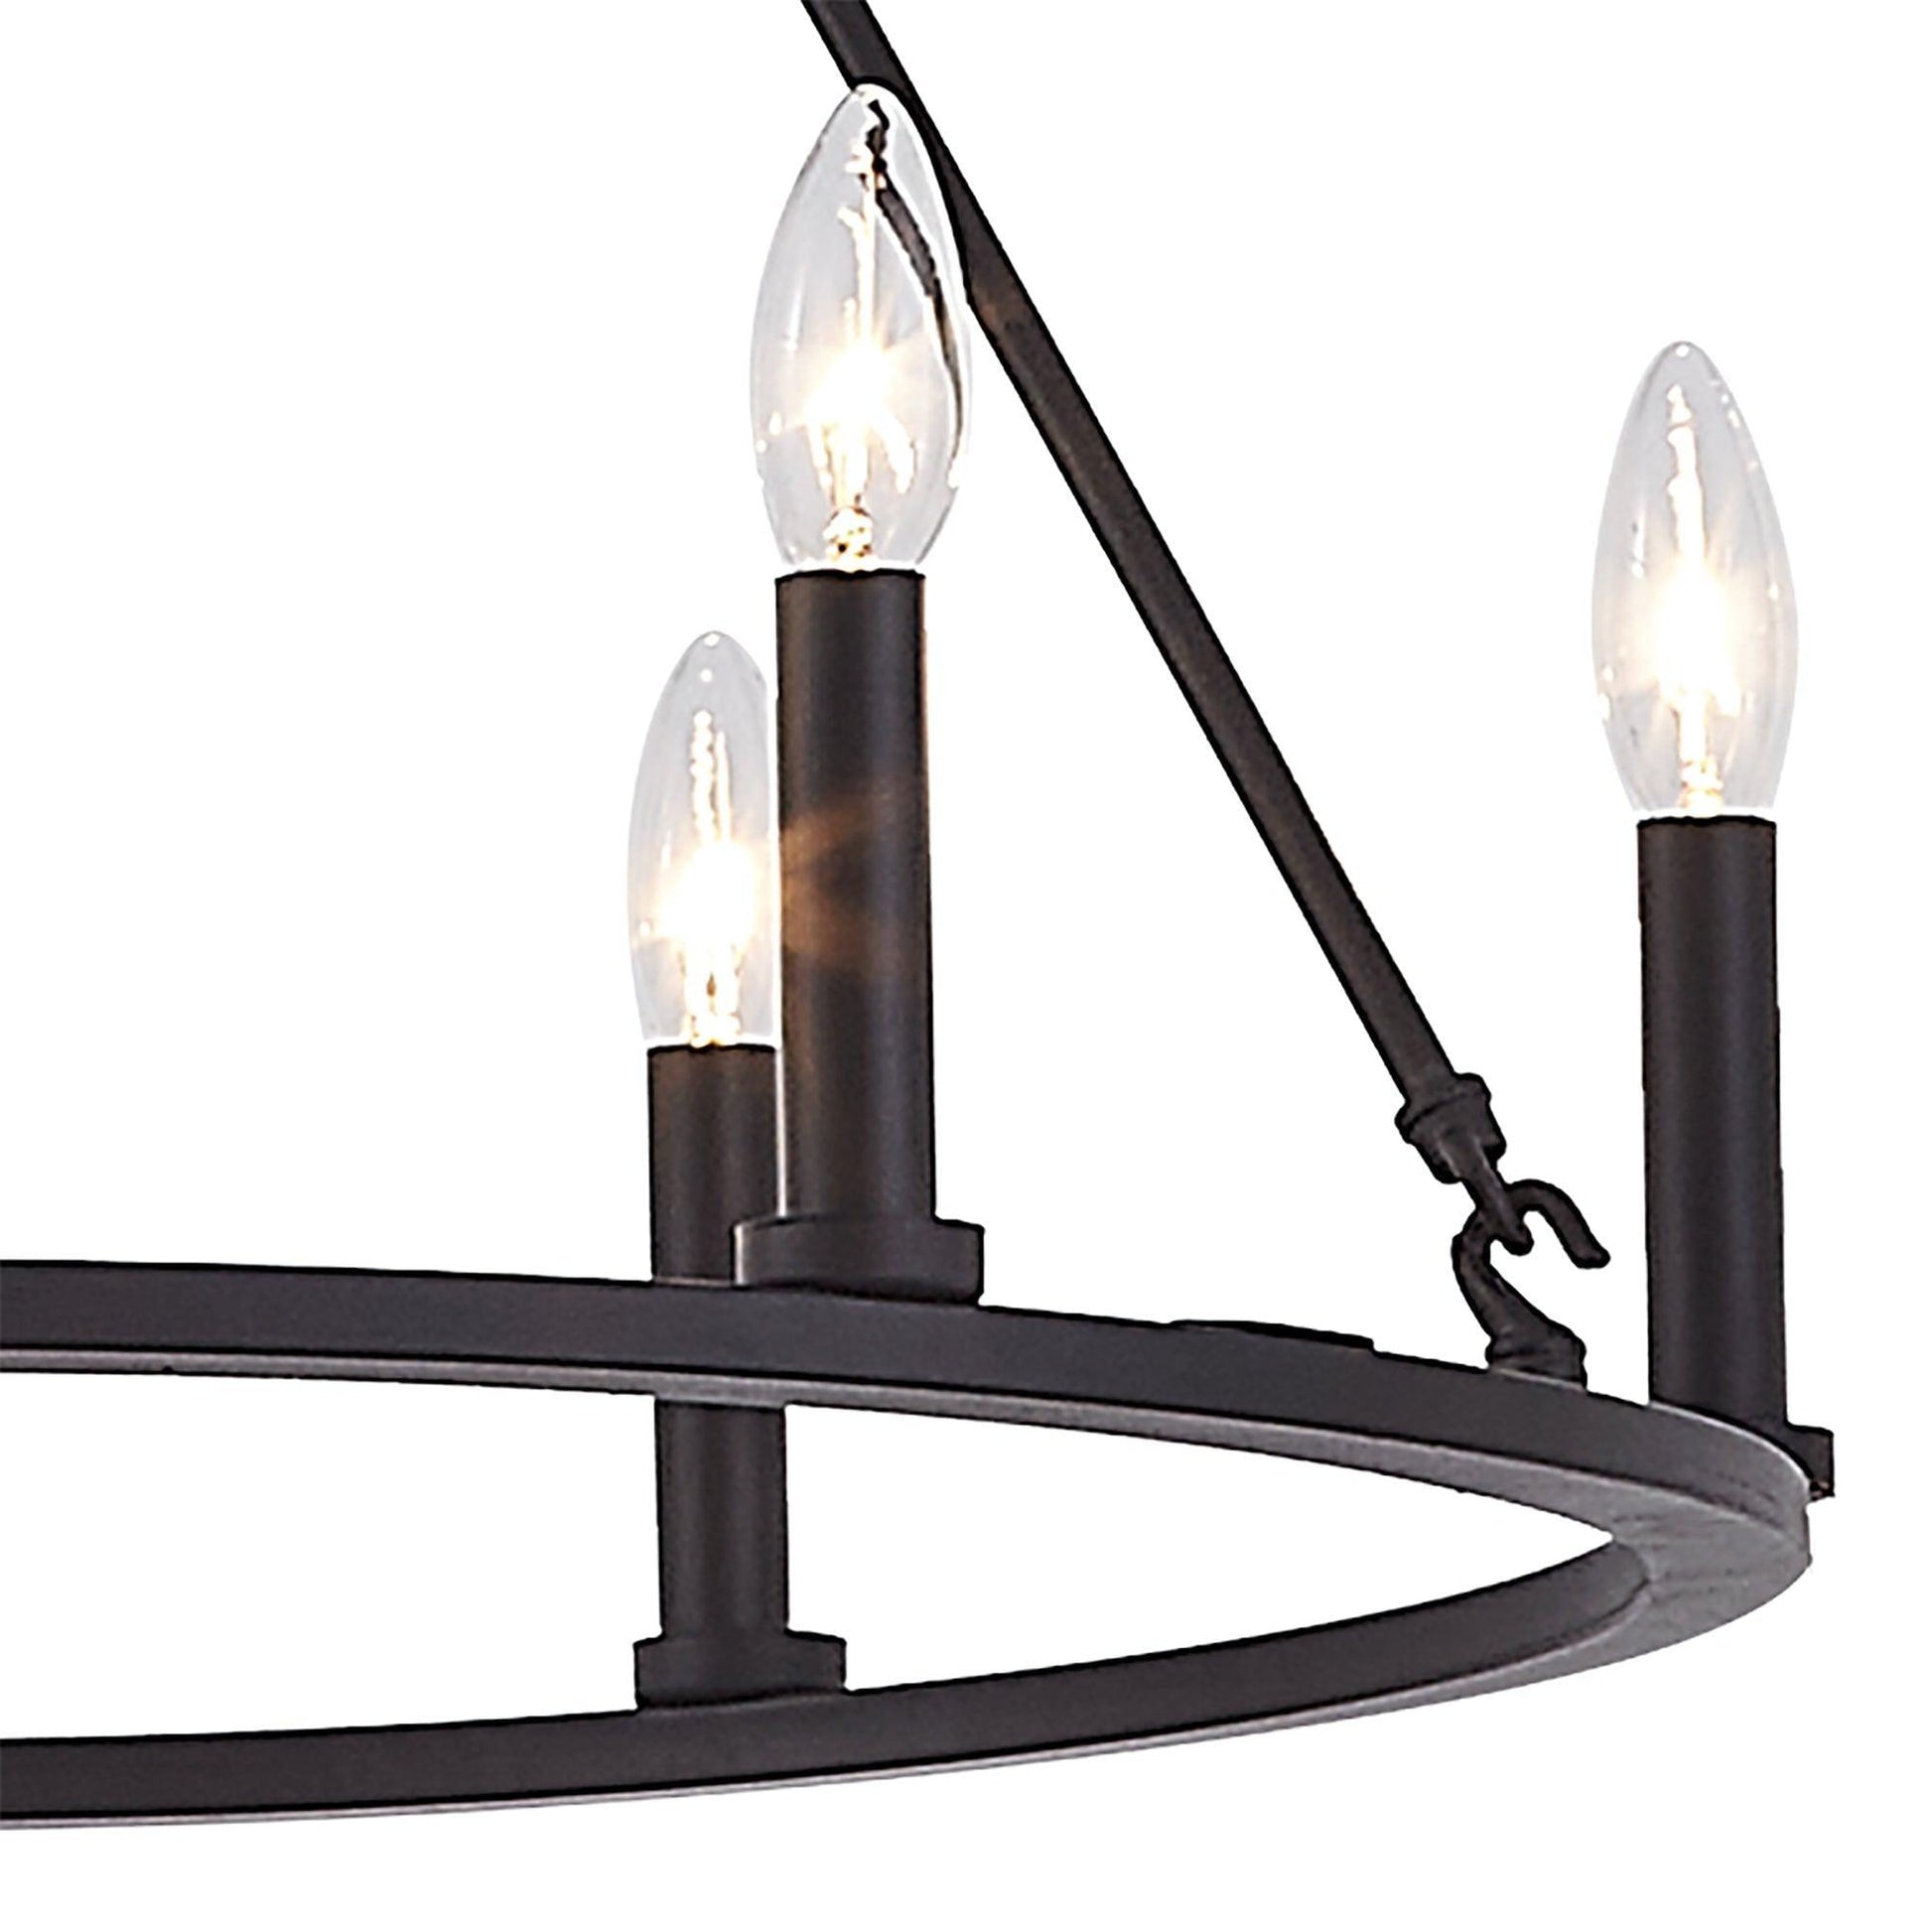 6 light candle style wagon wheel entry chandelier (8) by ACROMA